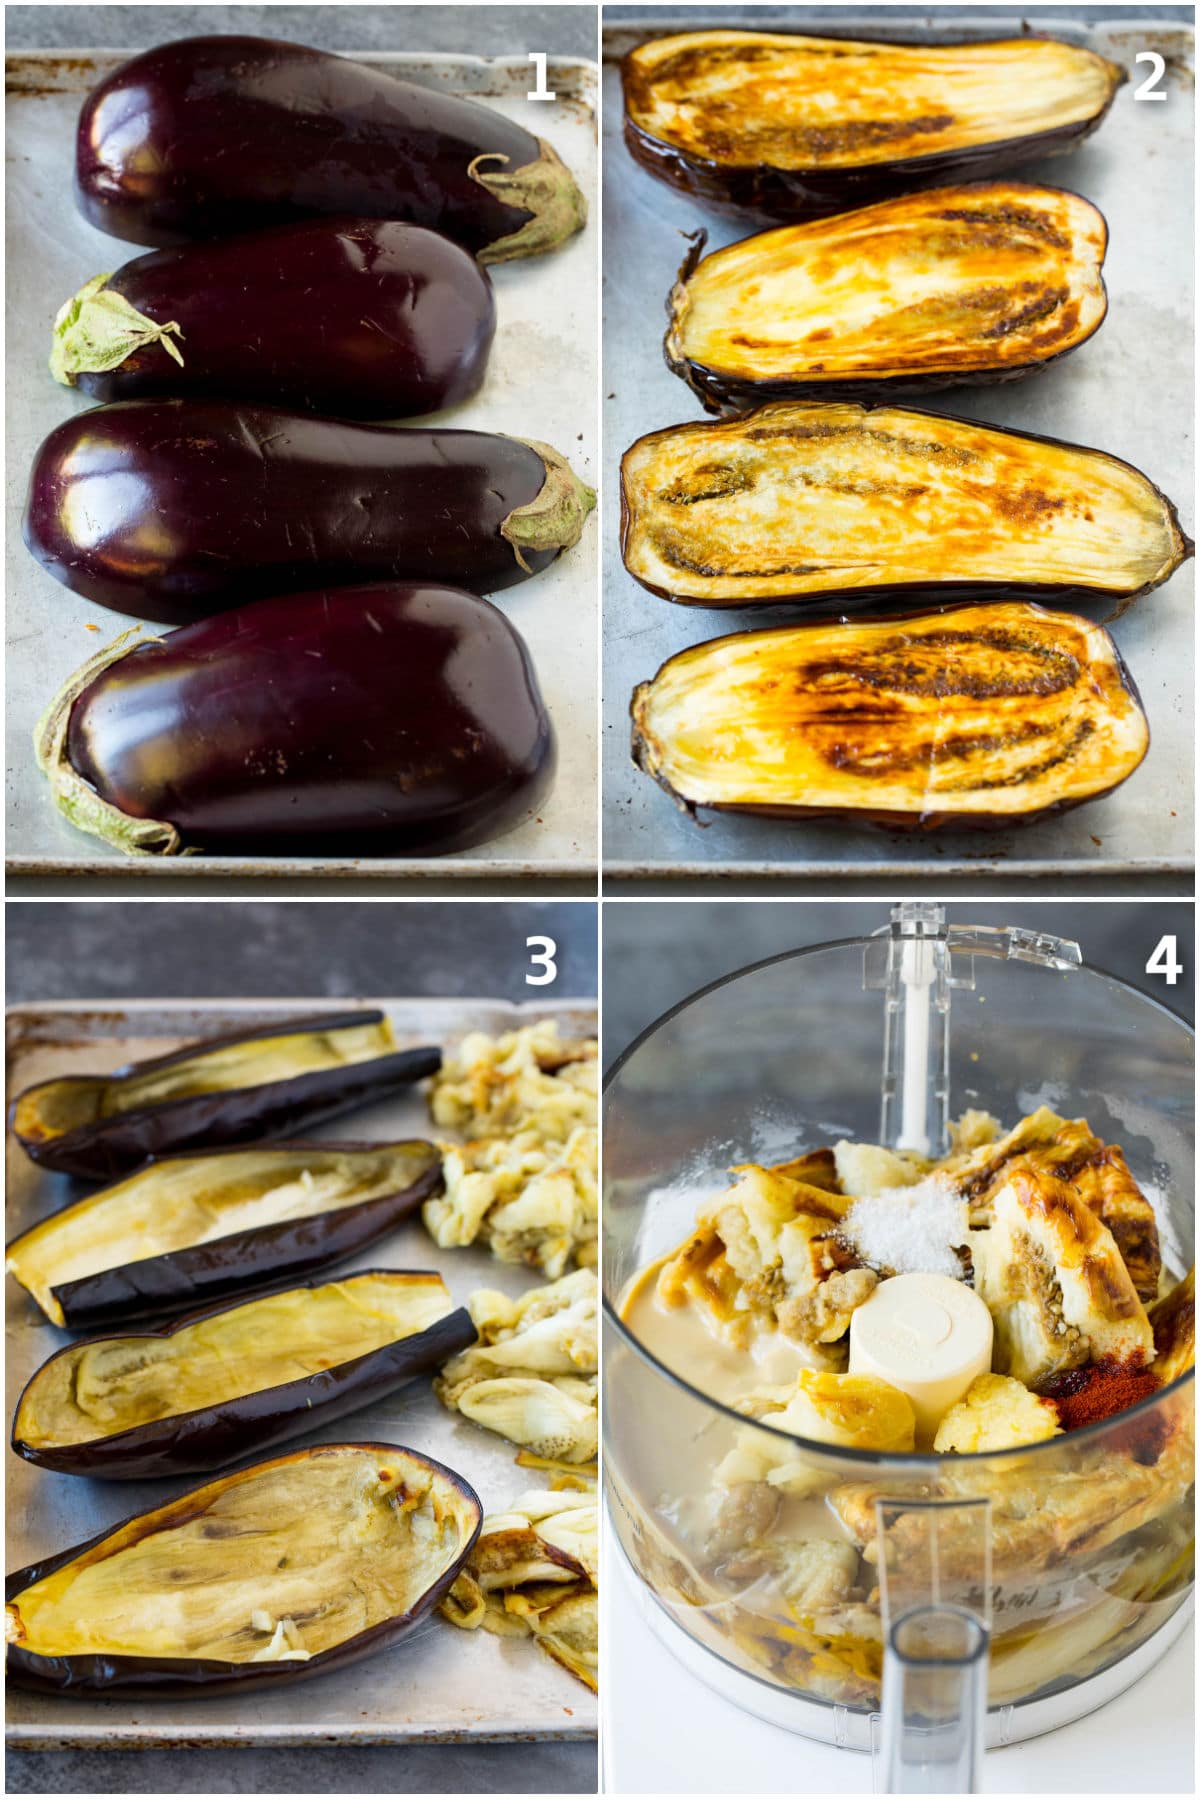 Process shots showing how to roast and puree eggplant.